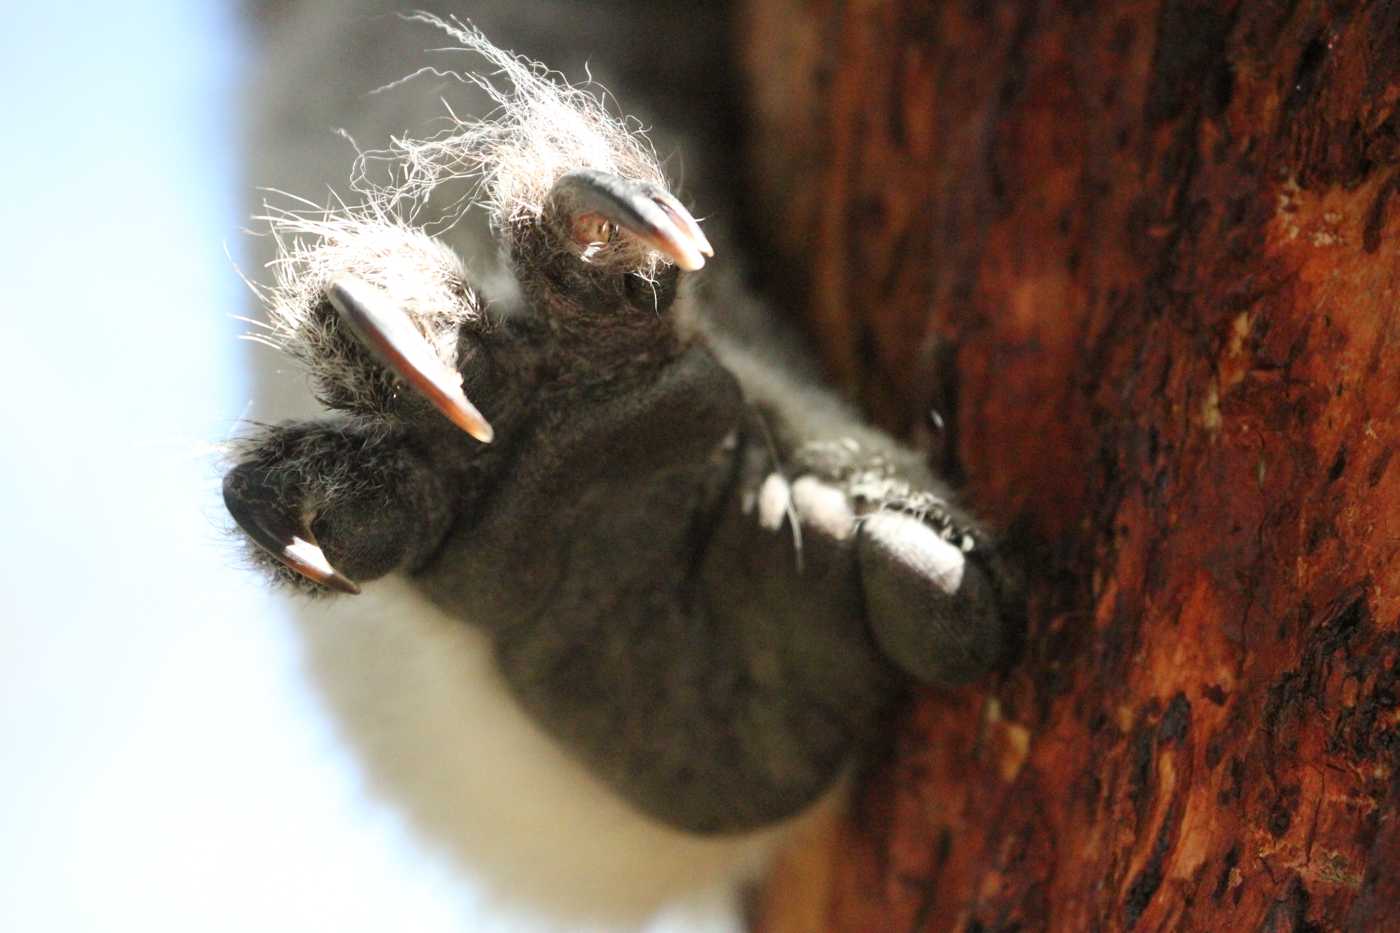 What can parasites teach us about managing koalas?